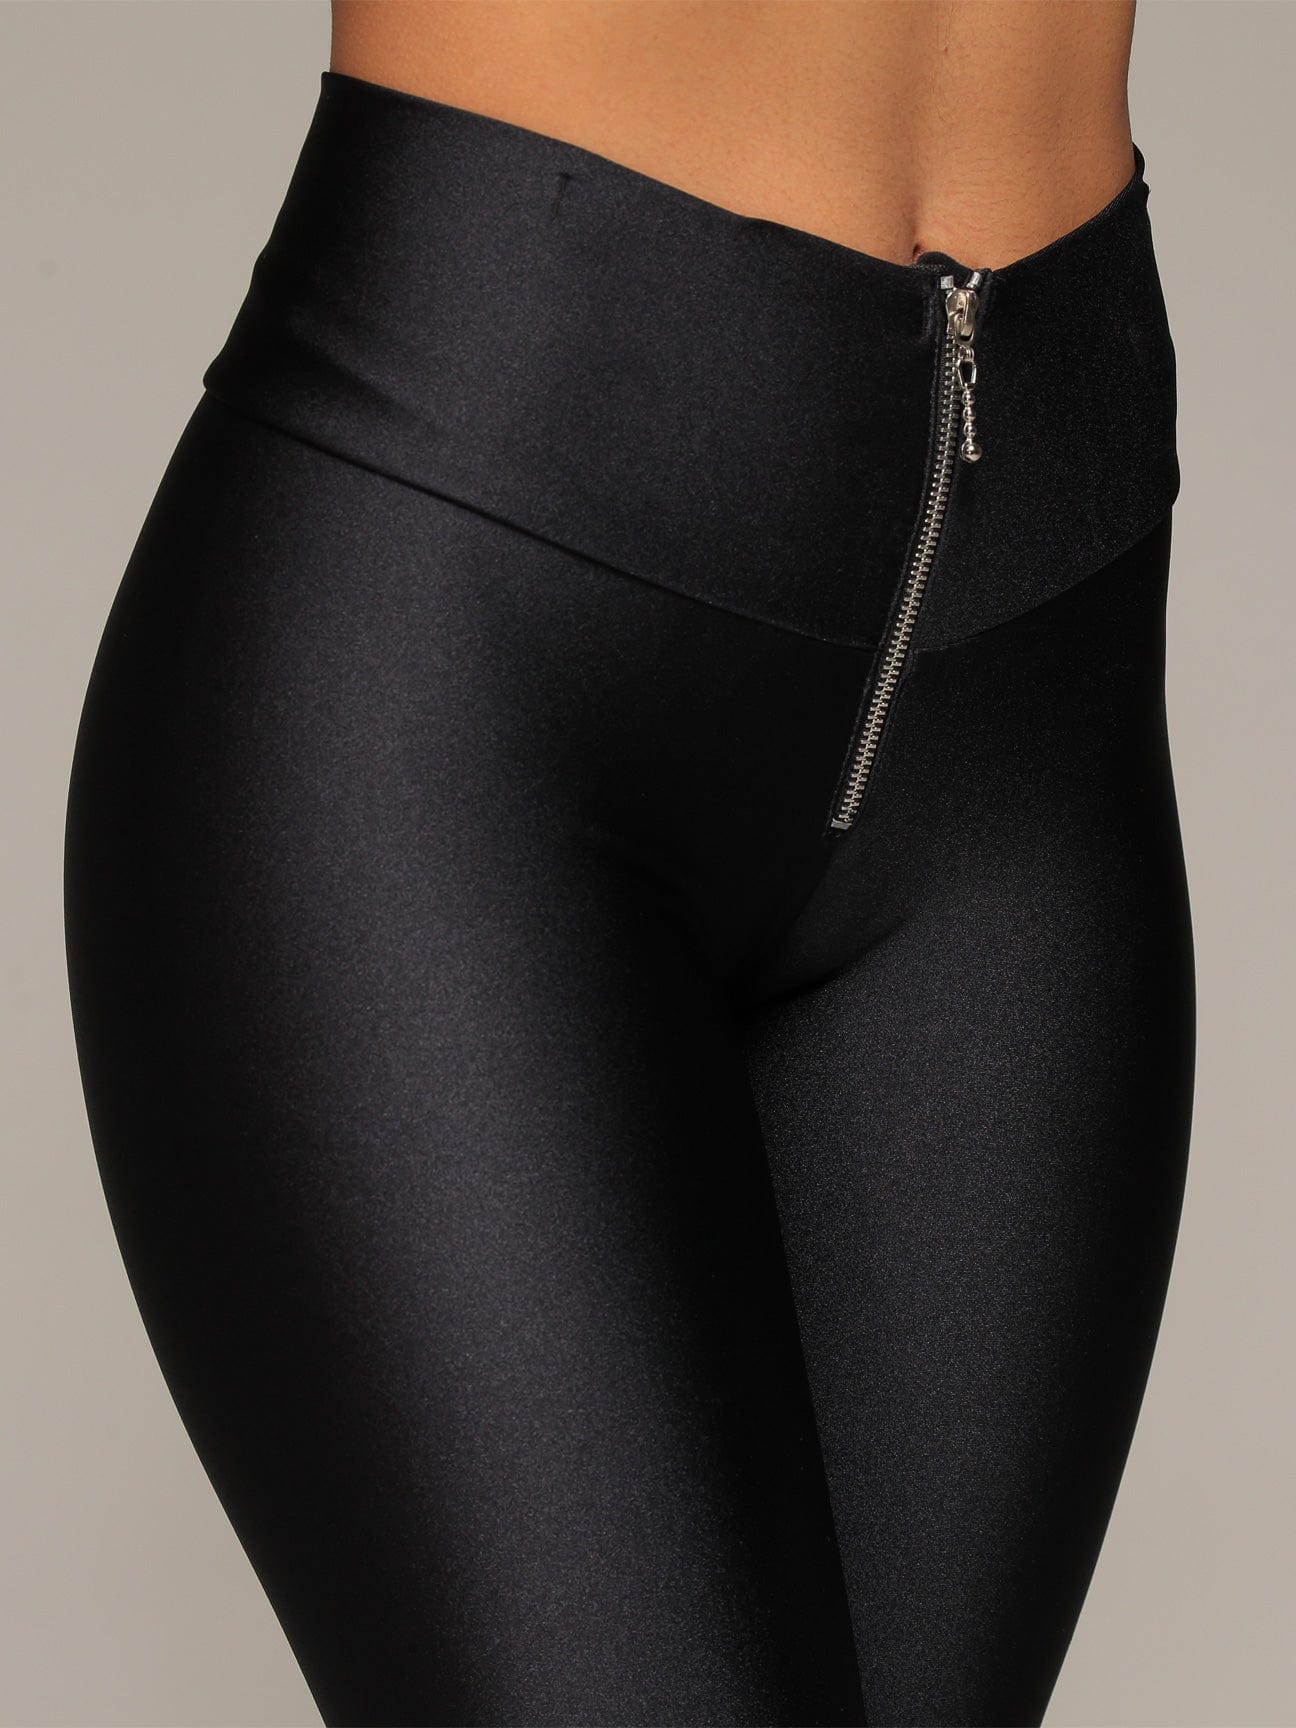 Business Butt Lift Leggings with Tummy Control 1282